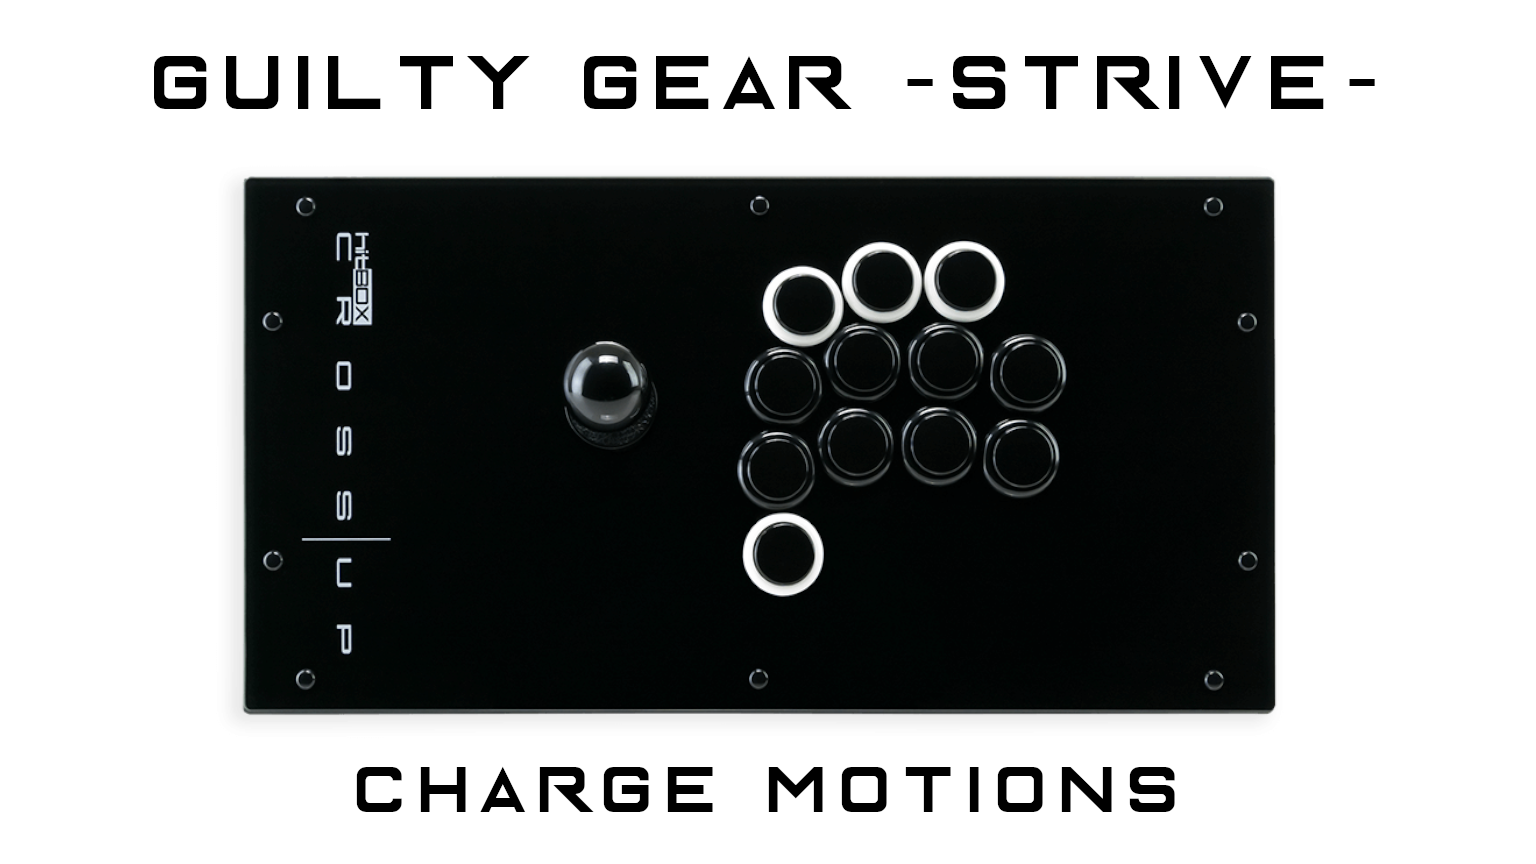 Guilty Gear -STRIVE- on Cross|Up - Charge Motions